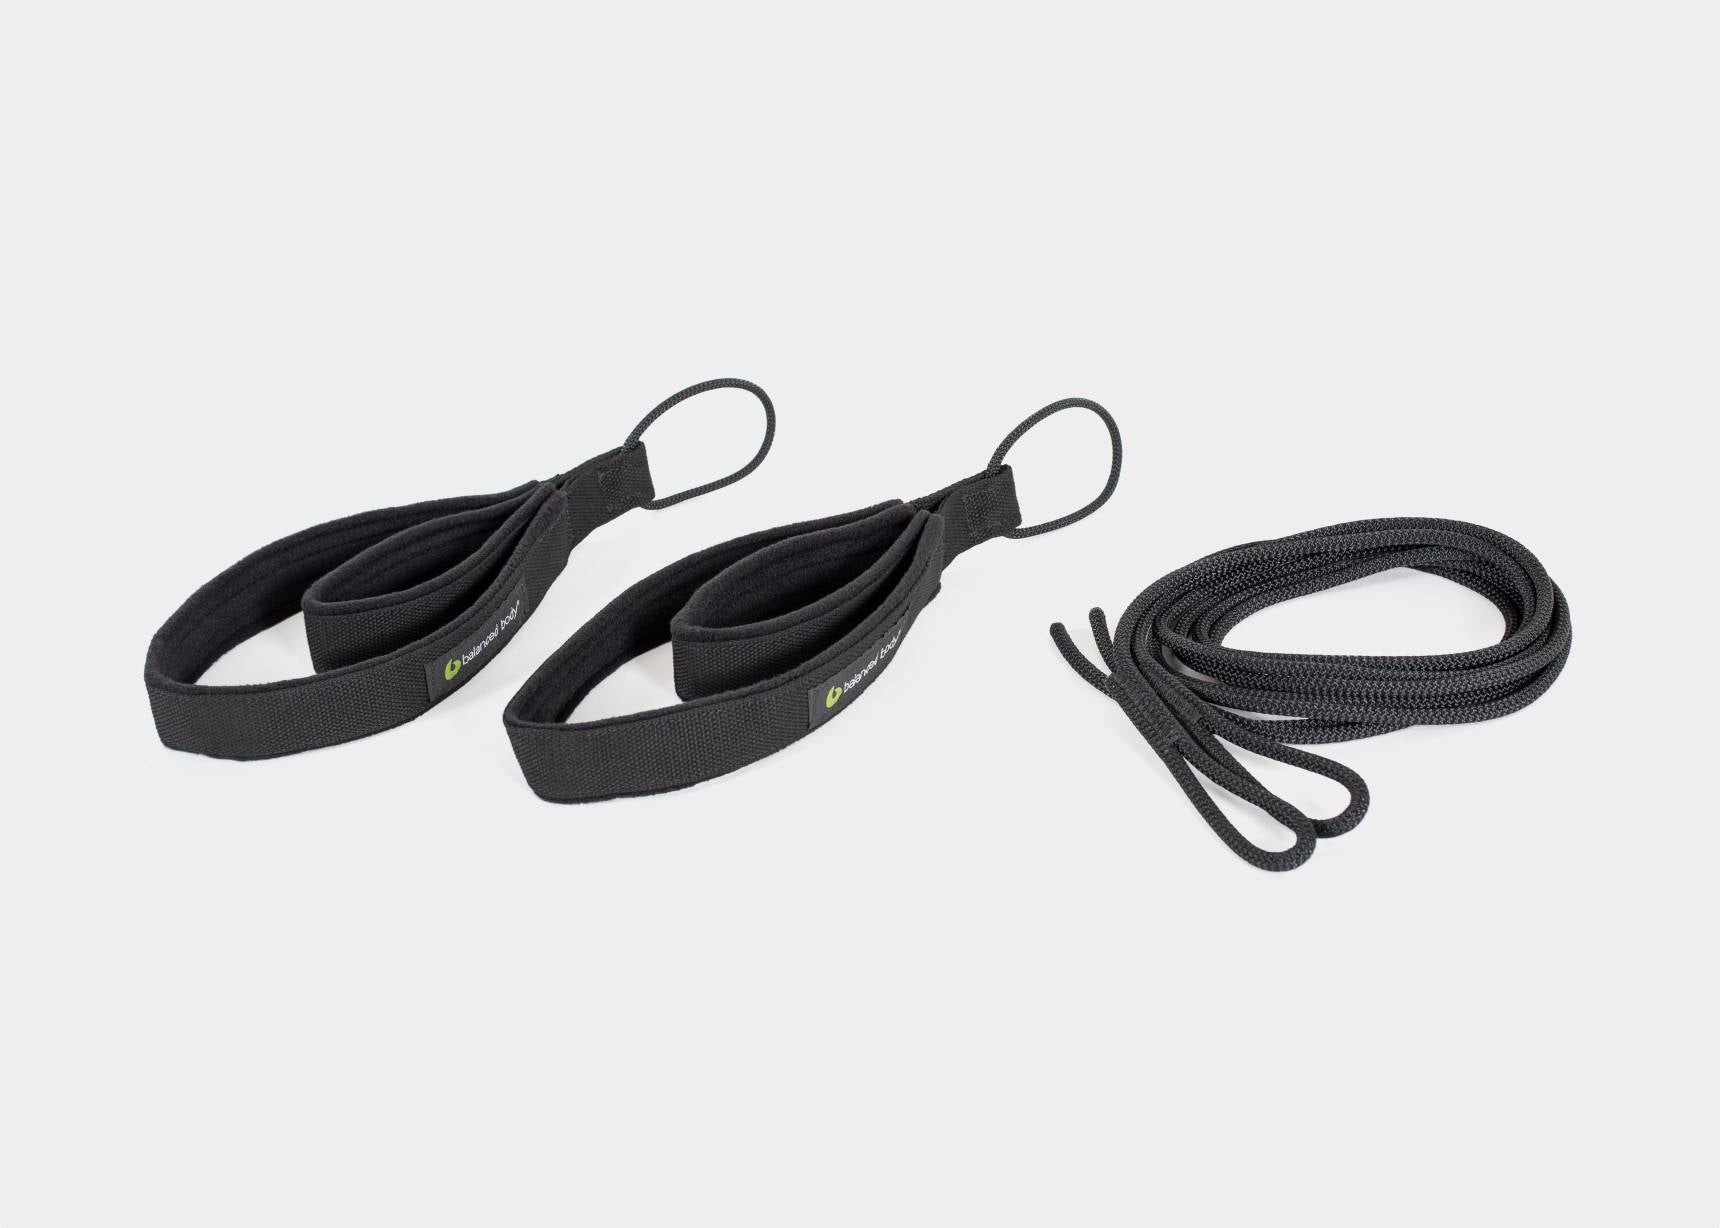 Pilates Double Loop Straps 2 Pieces Hands Feet Fitness Equipment Straps  Durable & Perfectly Seamed Double Loop Strap Band for Pilates Reformer,  Yoga